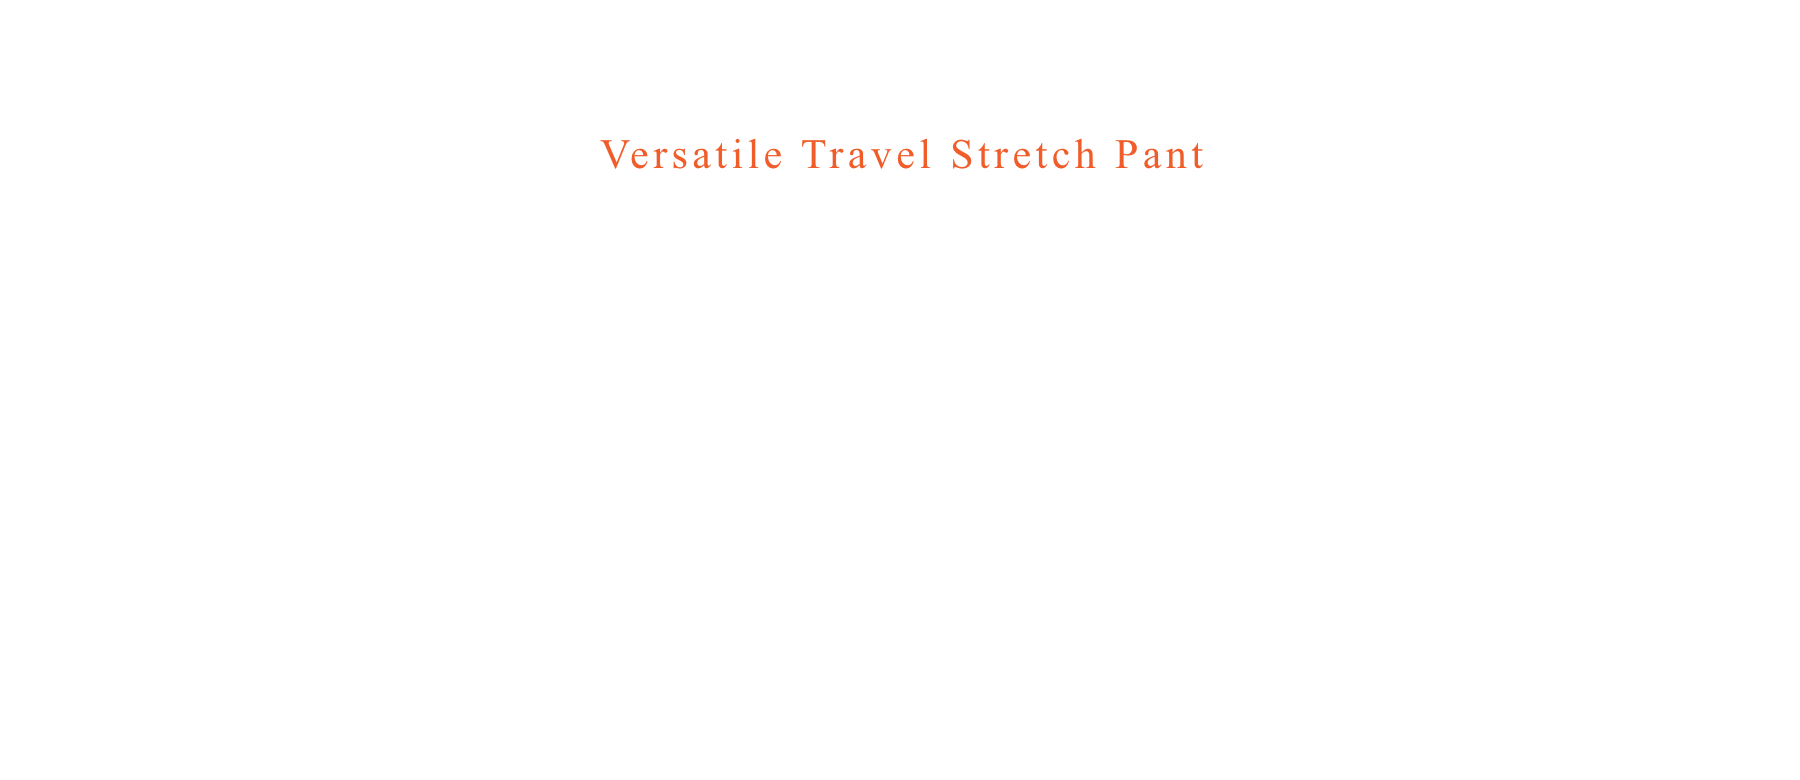 Tbe Layover Collection